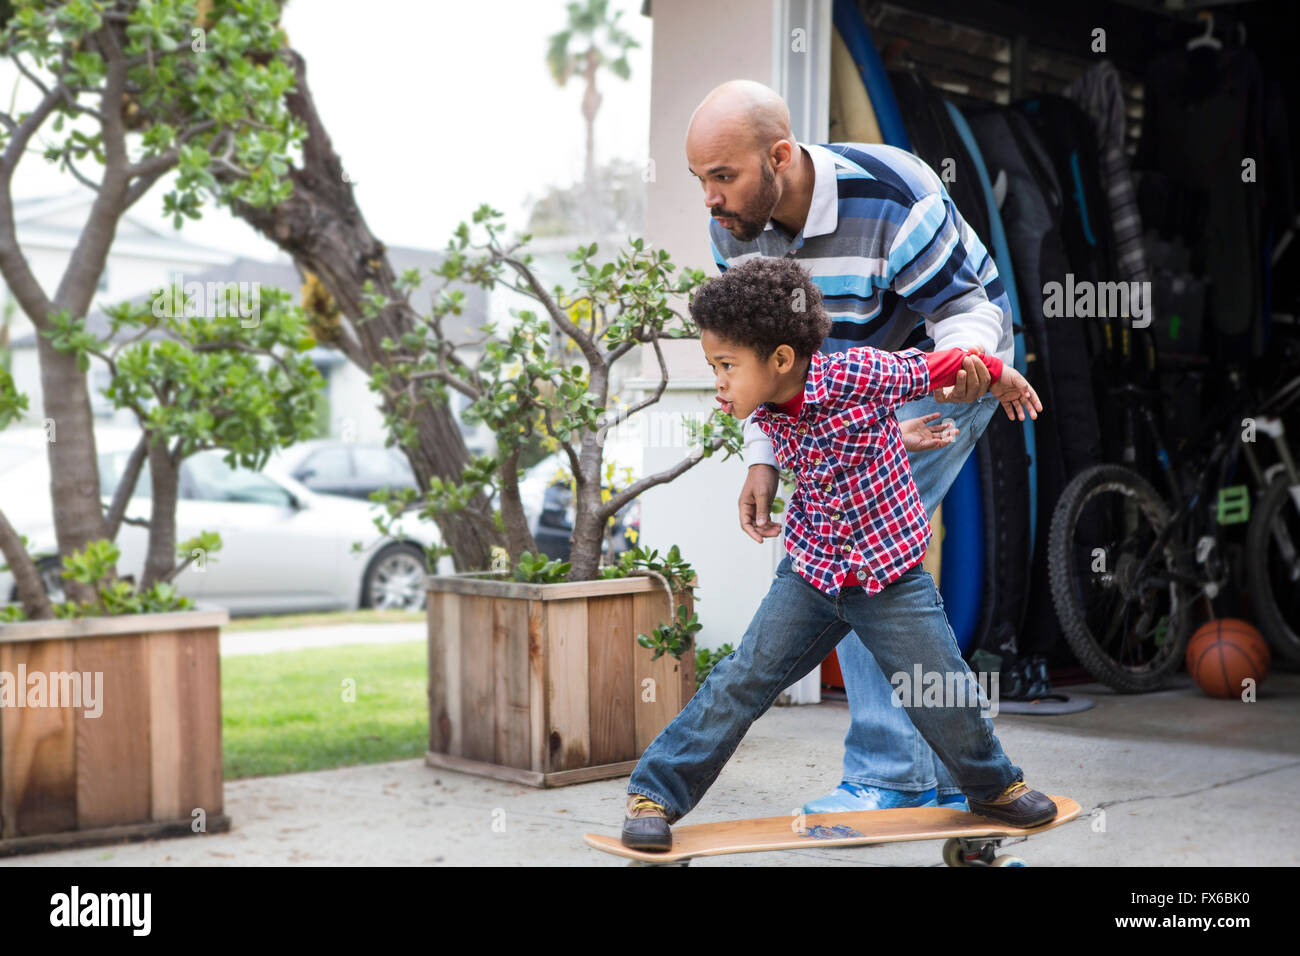 Mixed race father teaching son to ride skateboard outdoors Stock Photo